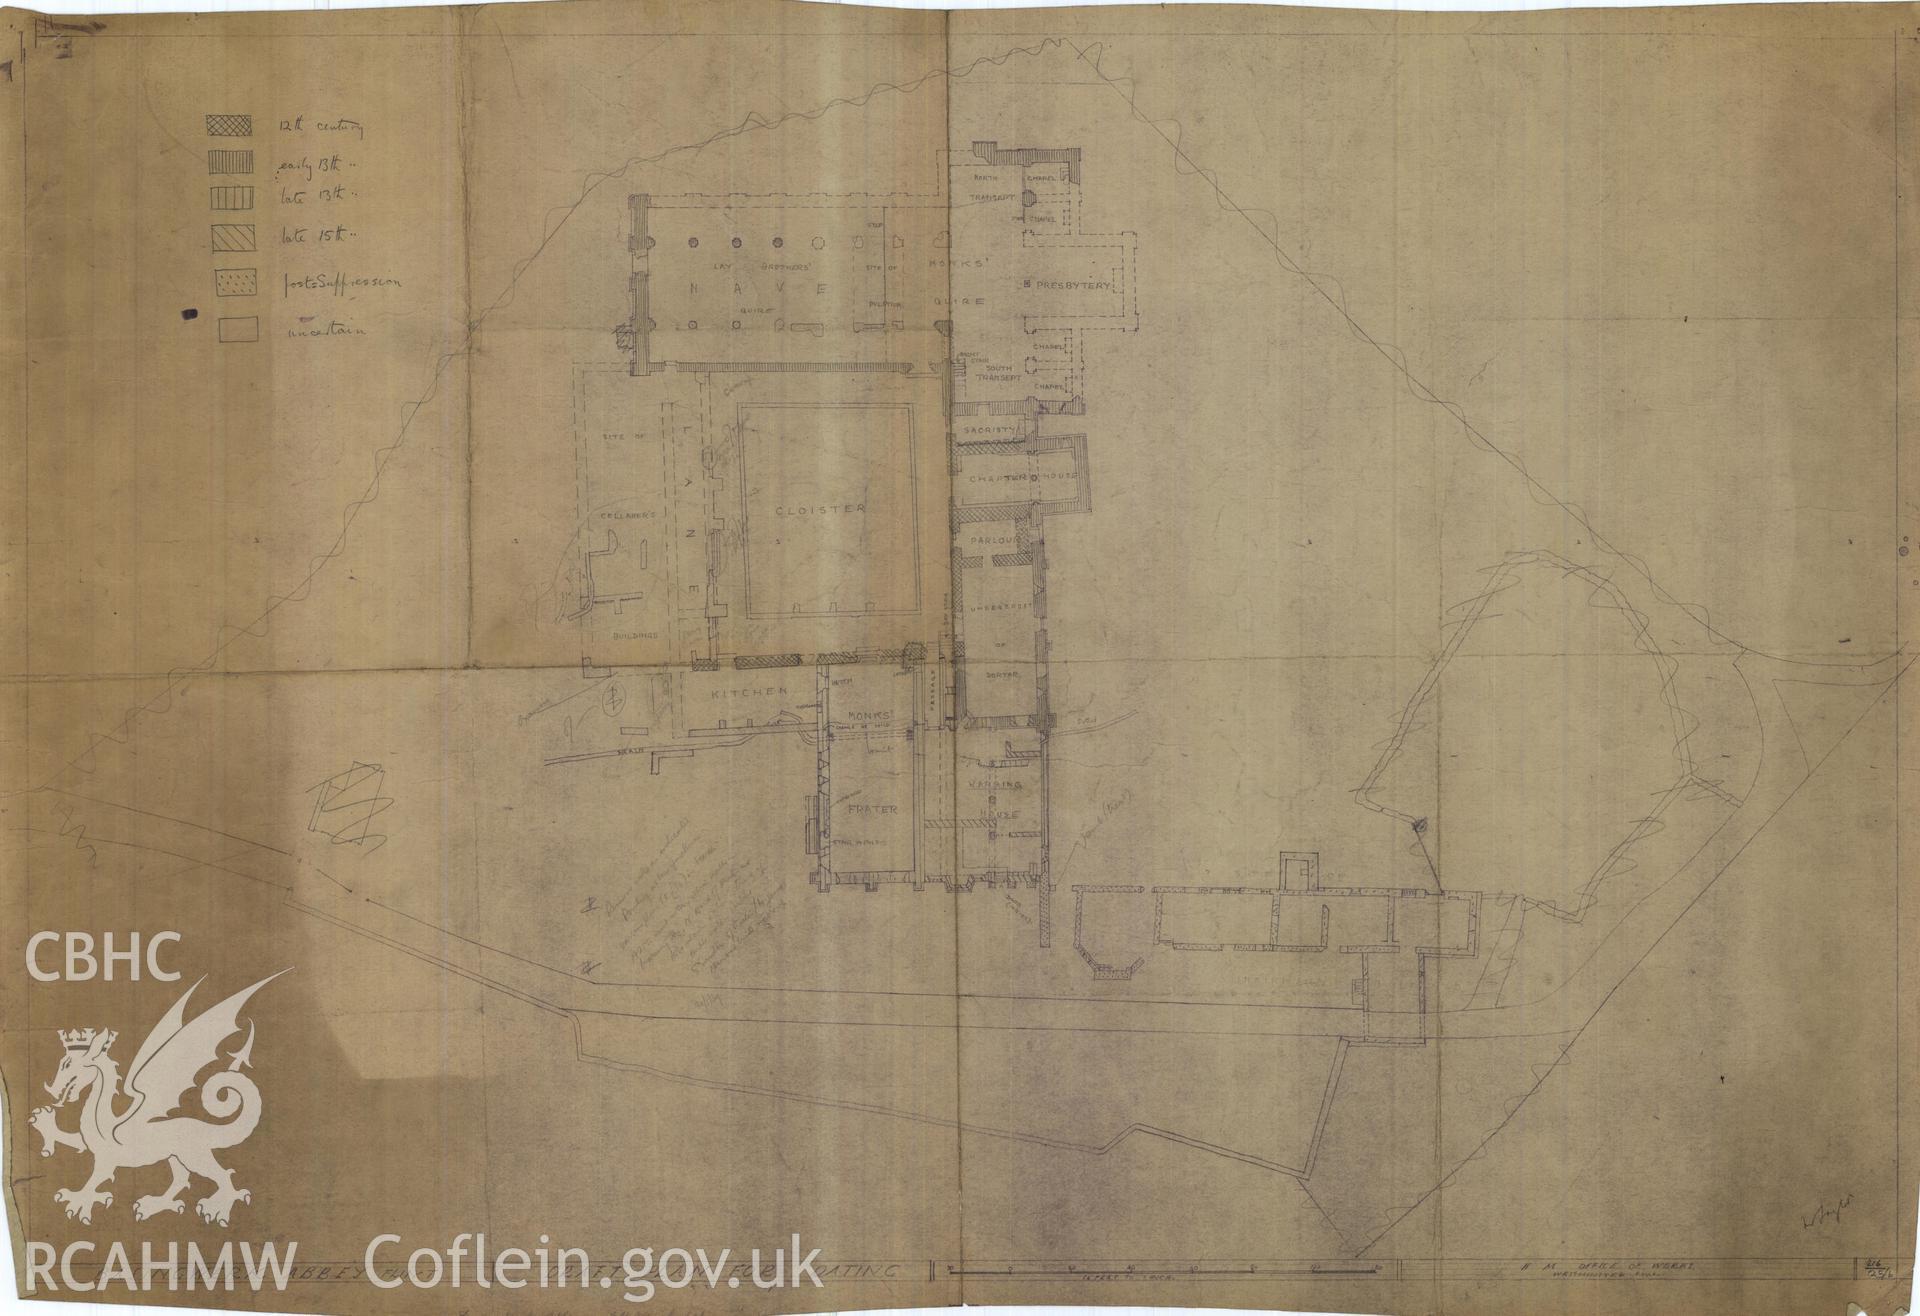 Cadw guardianship monument drawing of Basingwerk Abbey. Draft plan for dating. Cadw Ref. No. 216/25/b. Scale 1:192.